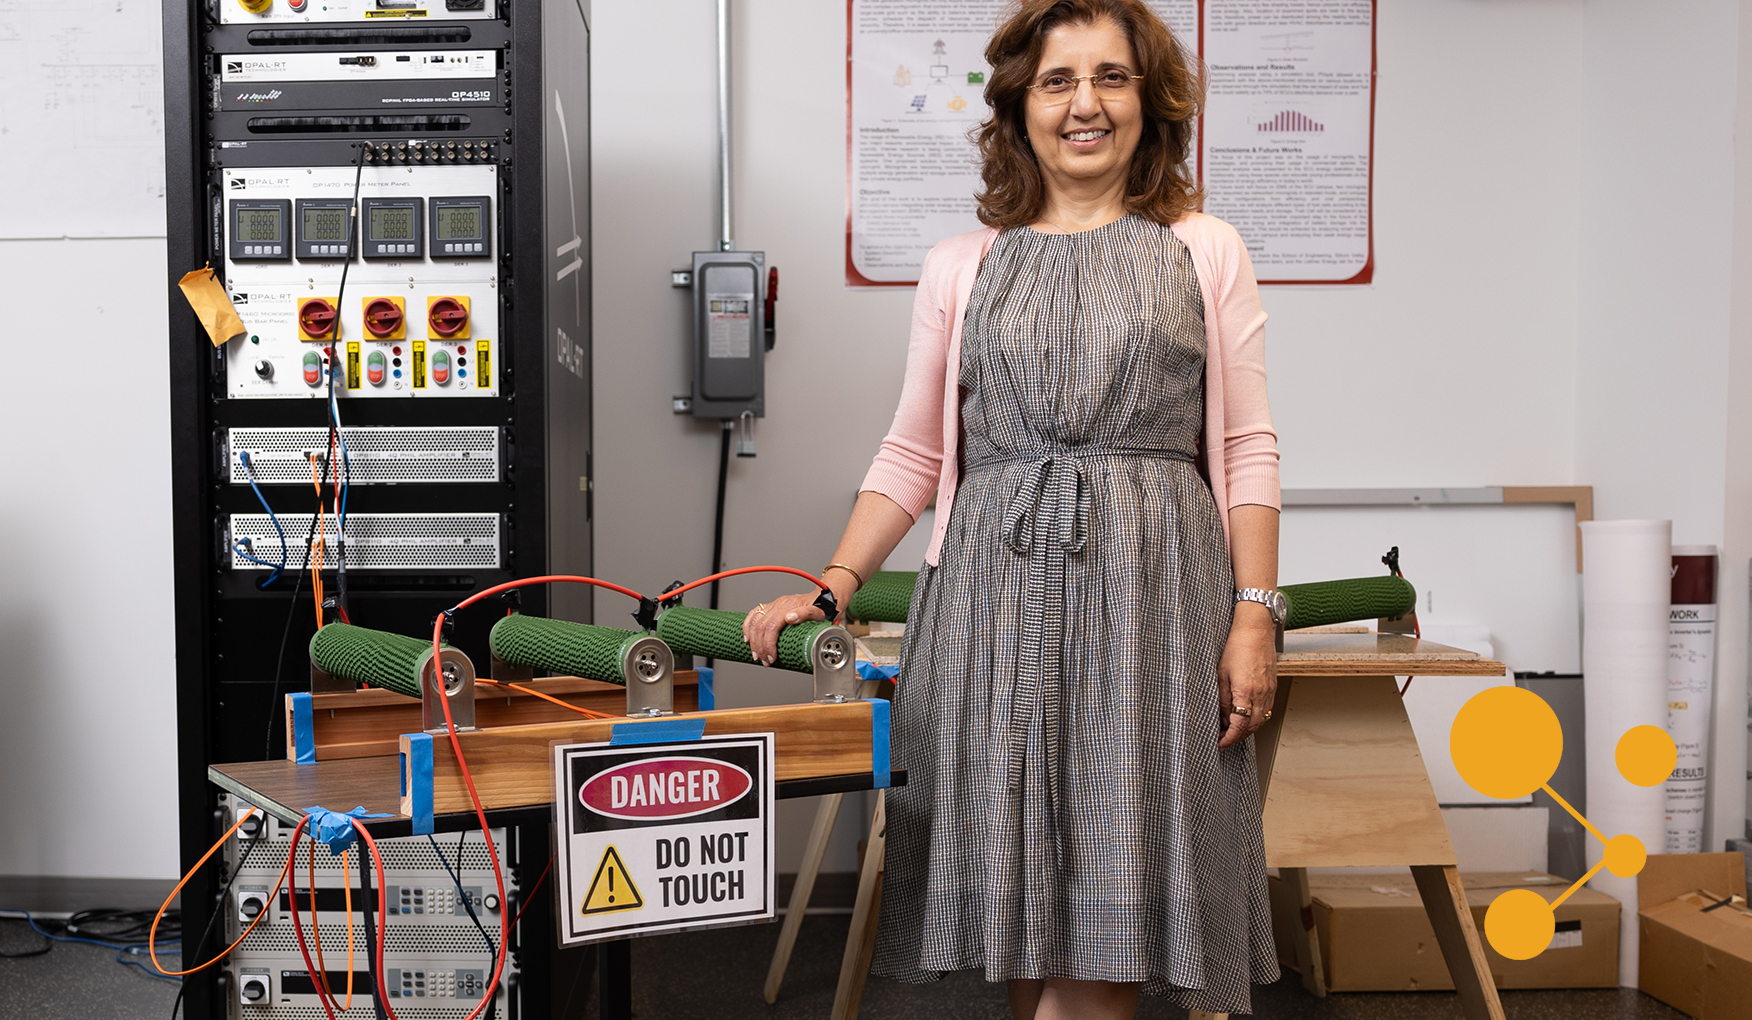 Santa Clara associate professor Maryam Khanbaghi stands confidently in a lab, hand on a microgrid simulator with a 'Danger: Do Not Touch' warning. The background is filled with control panels and safety diagrams, highlighting a sophisticated electrical engineering research setting.